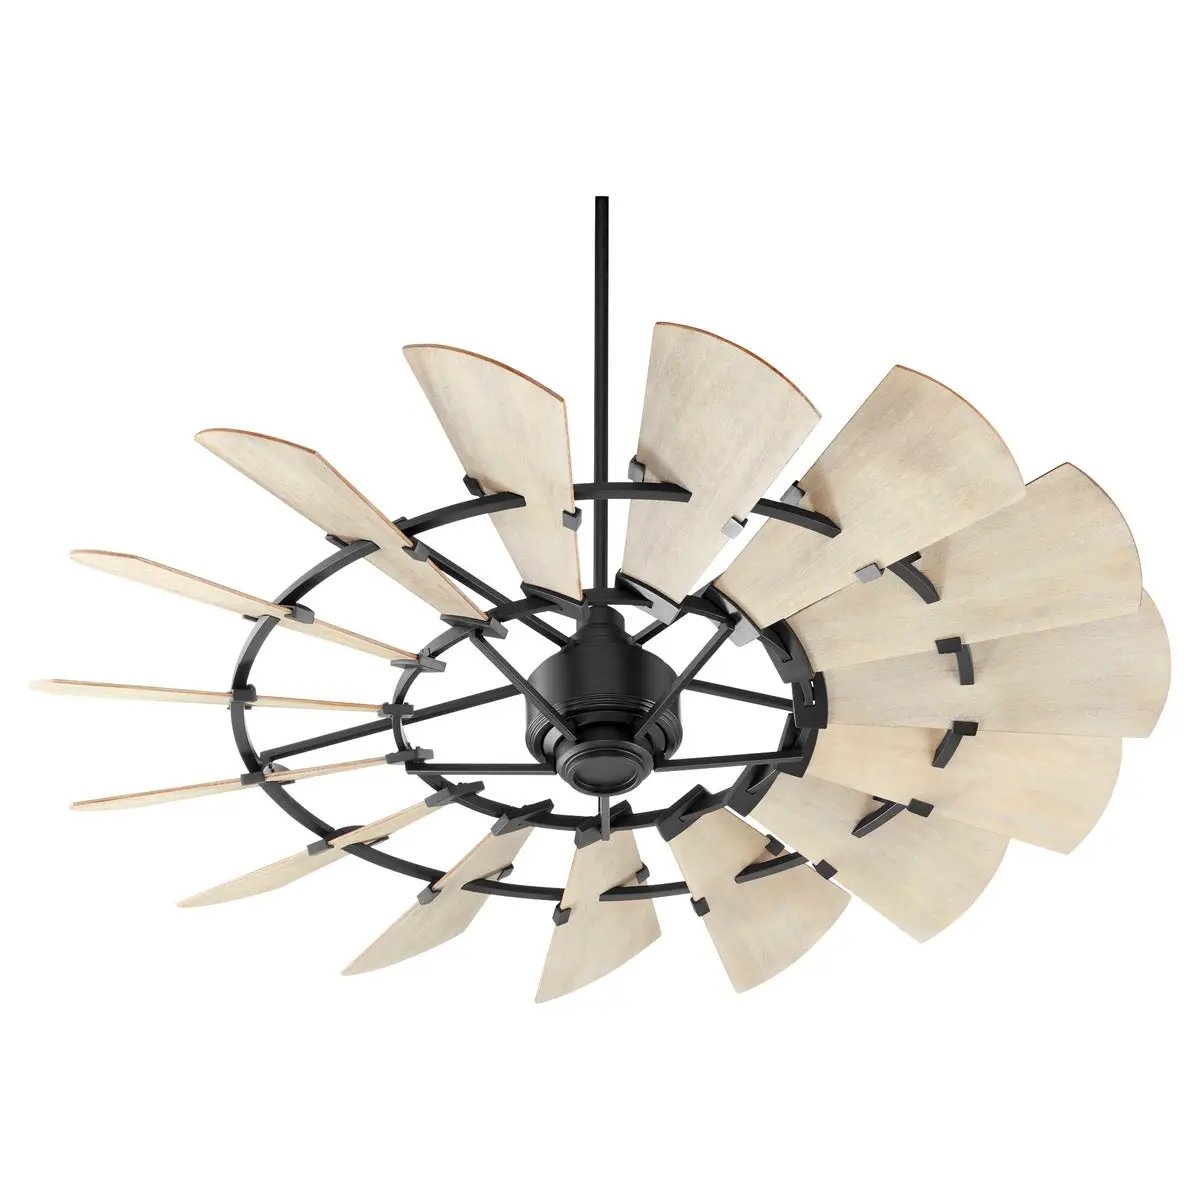 Windmill Ceiling Fan with 15 weathered oak wooden blades, rustic design. UL Listed, Dry Location. Dimensions: 16.5"H x 60"W. Limited Lifetime Warranty.